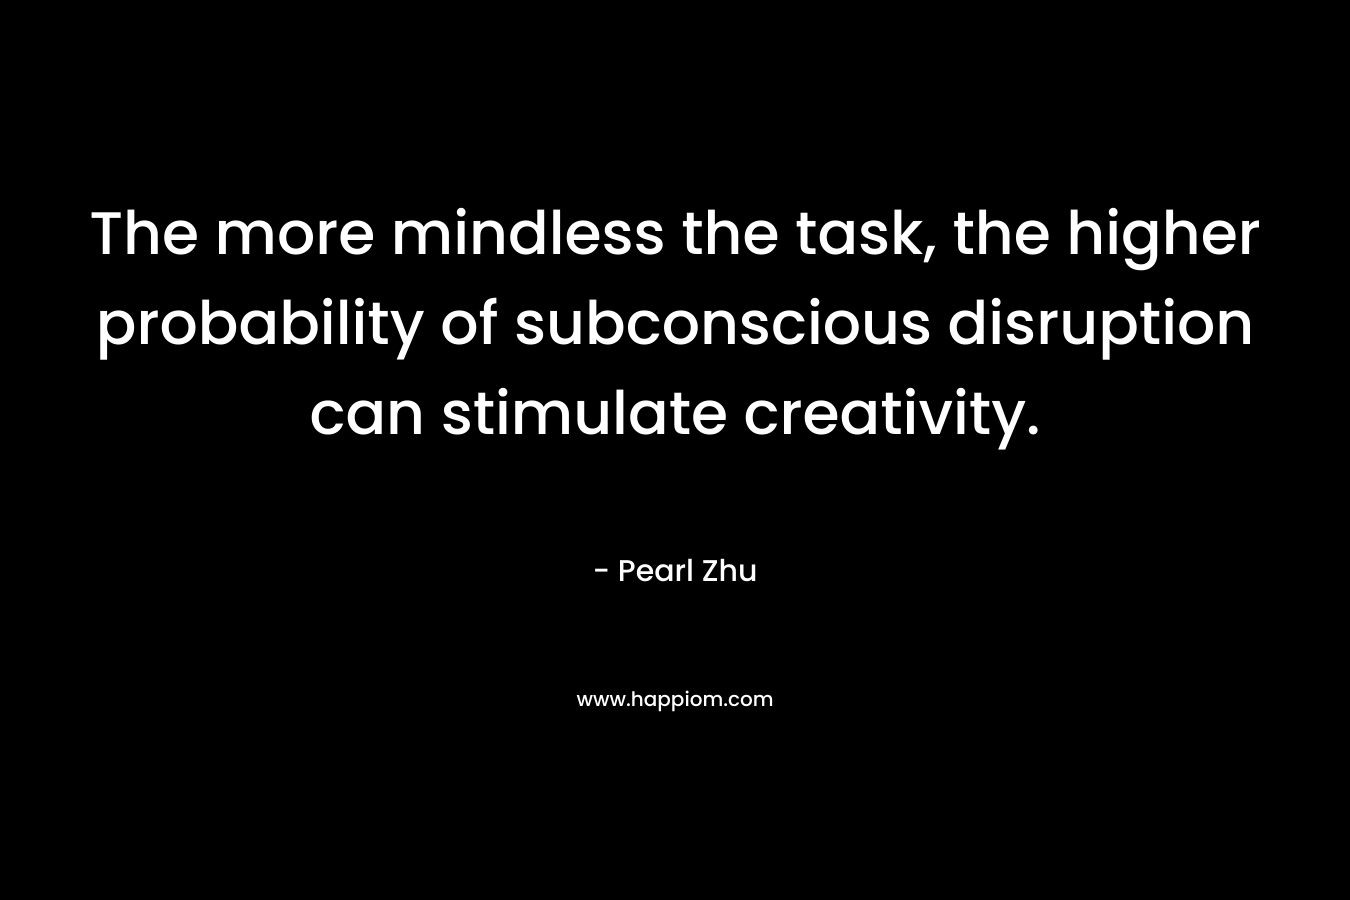 The more mindless the task, the higher probability of subconscious disruption can stimulate creativity. – Pearl Zhu